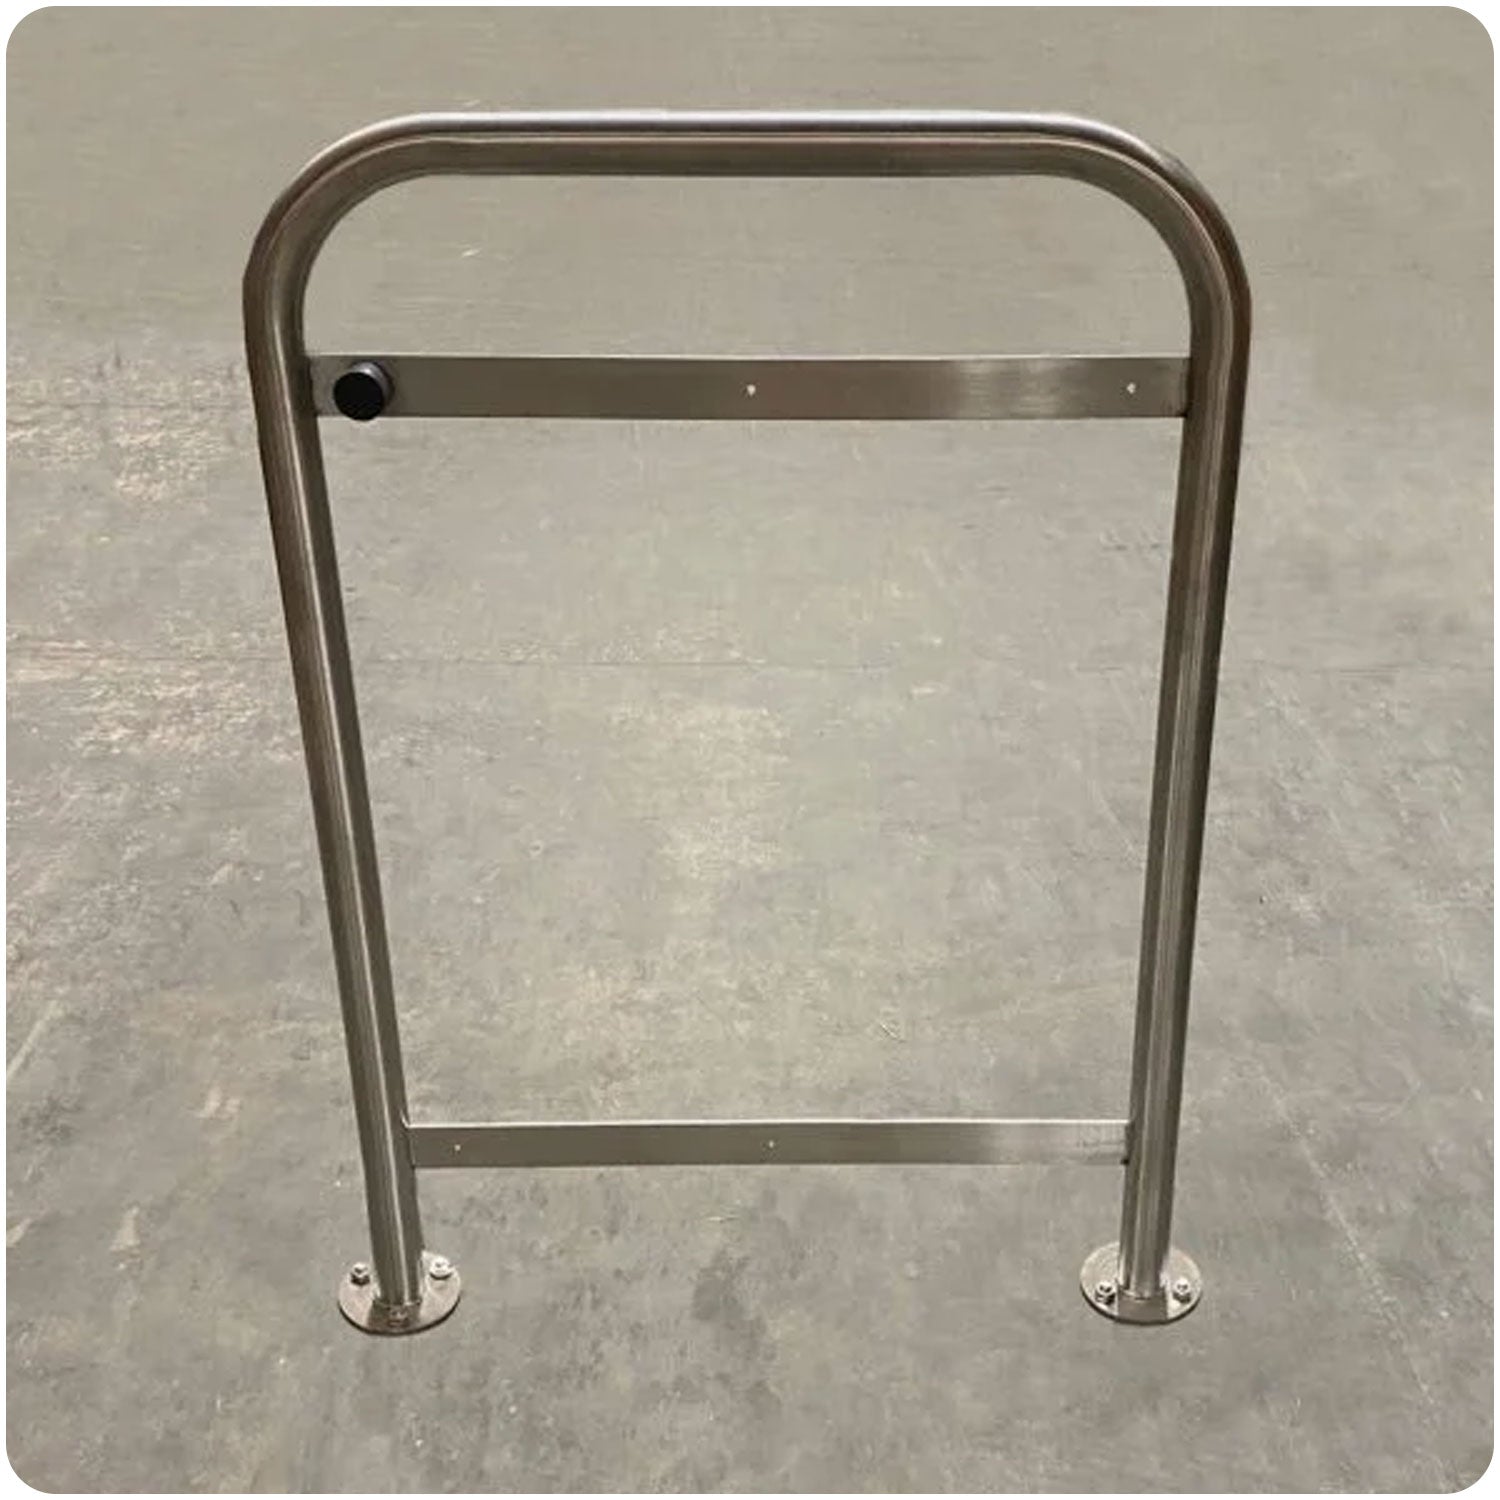 door-guard-stopper-800mm-protector-heavy-duty-large-bumper-ragged-galvanised-stainless-steel-rubber-stop-safety-barrier-flanged-indoor-outdoor-commercial-schools-universities-warehouses-factories